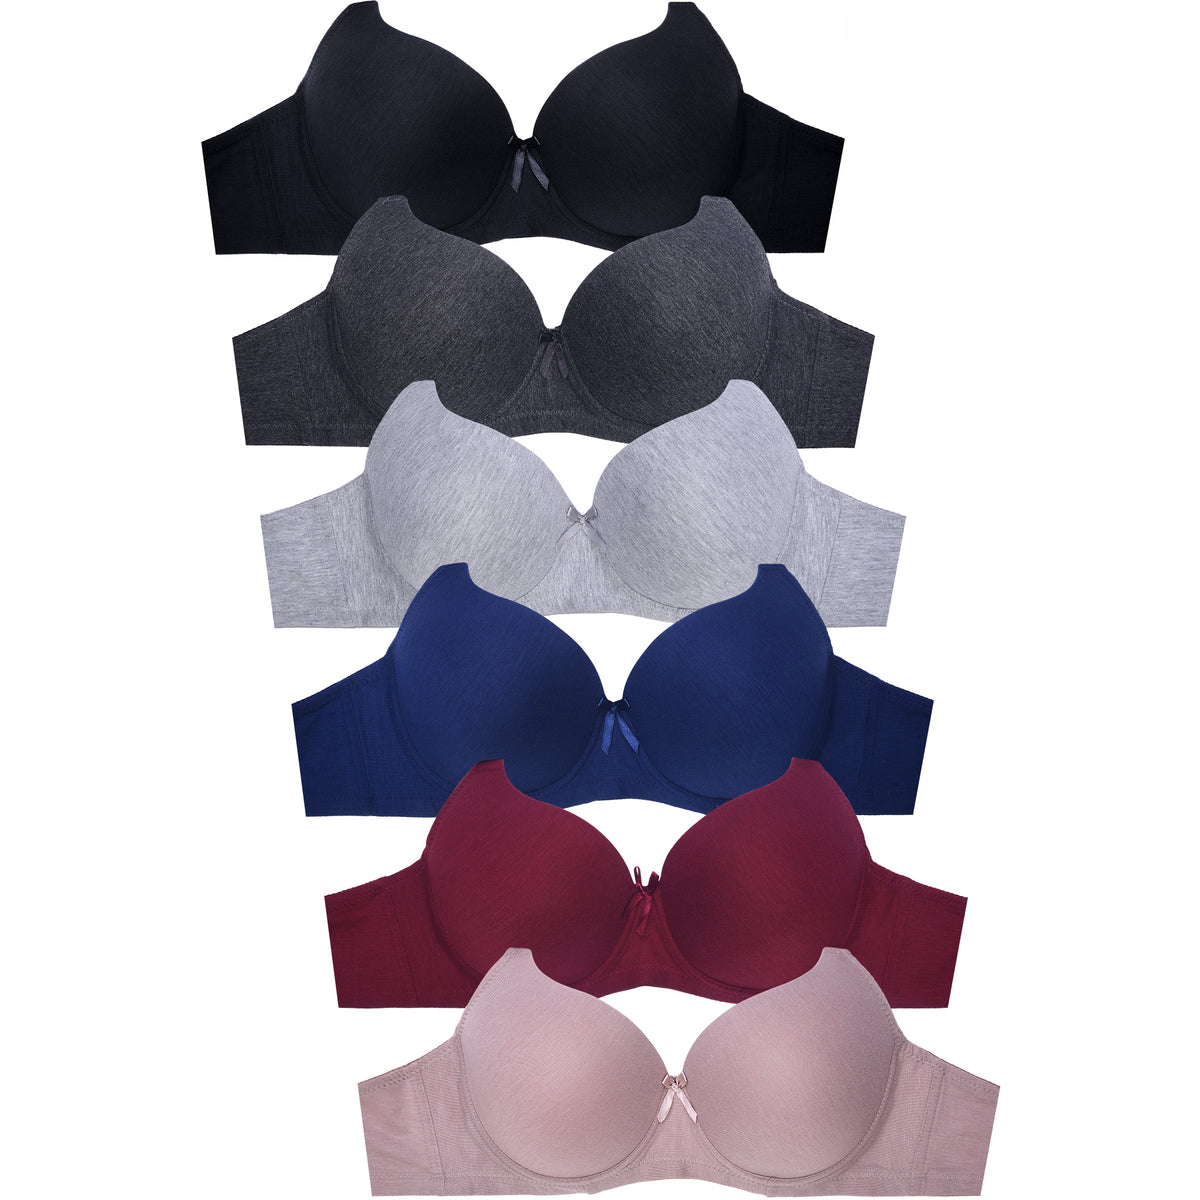 Women's Push-Up Bras With Lace Accents (6-Pack)